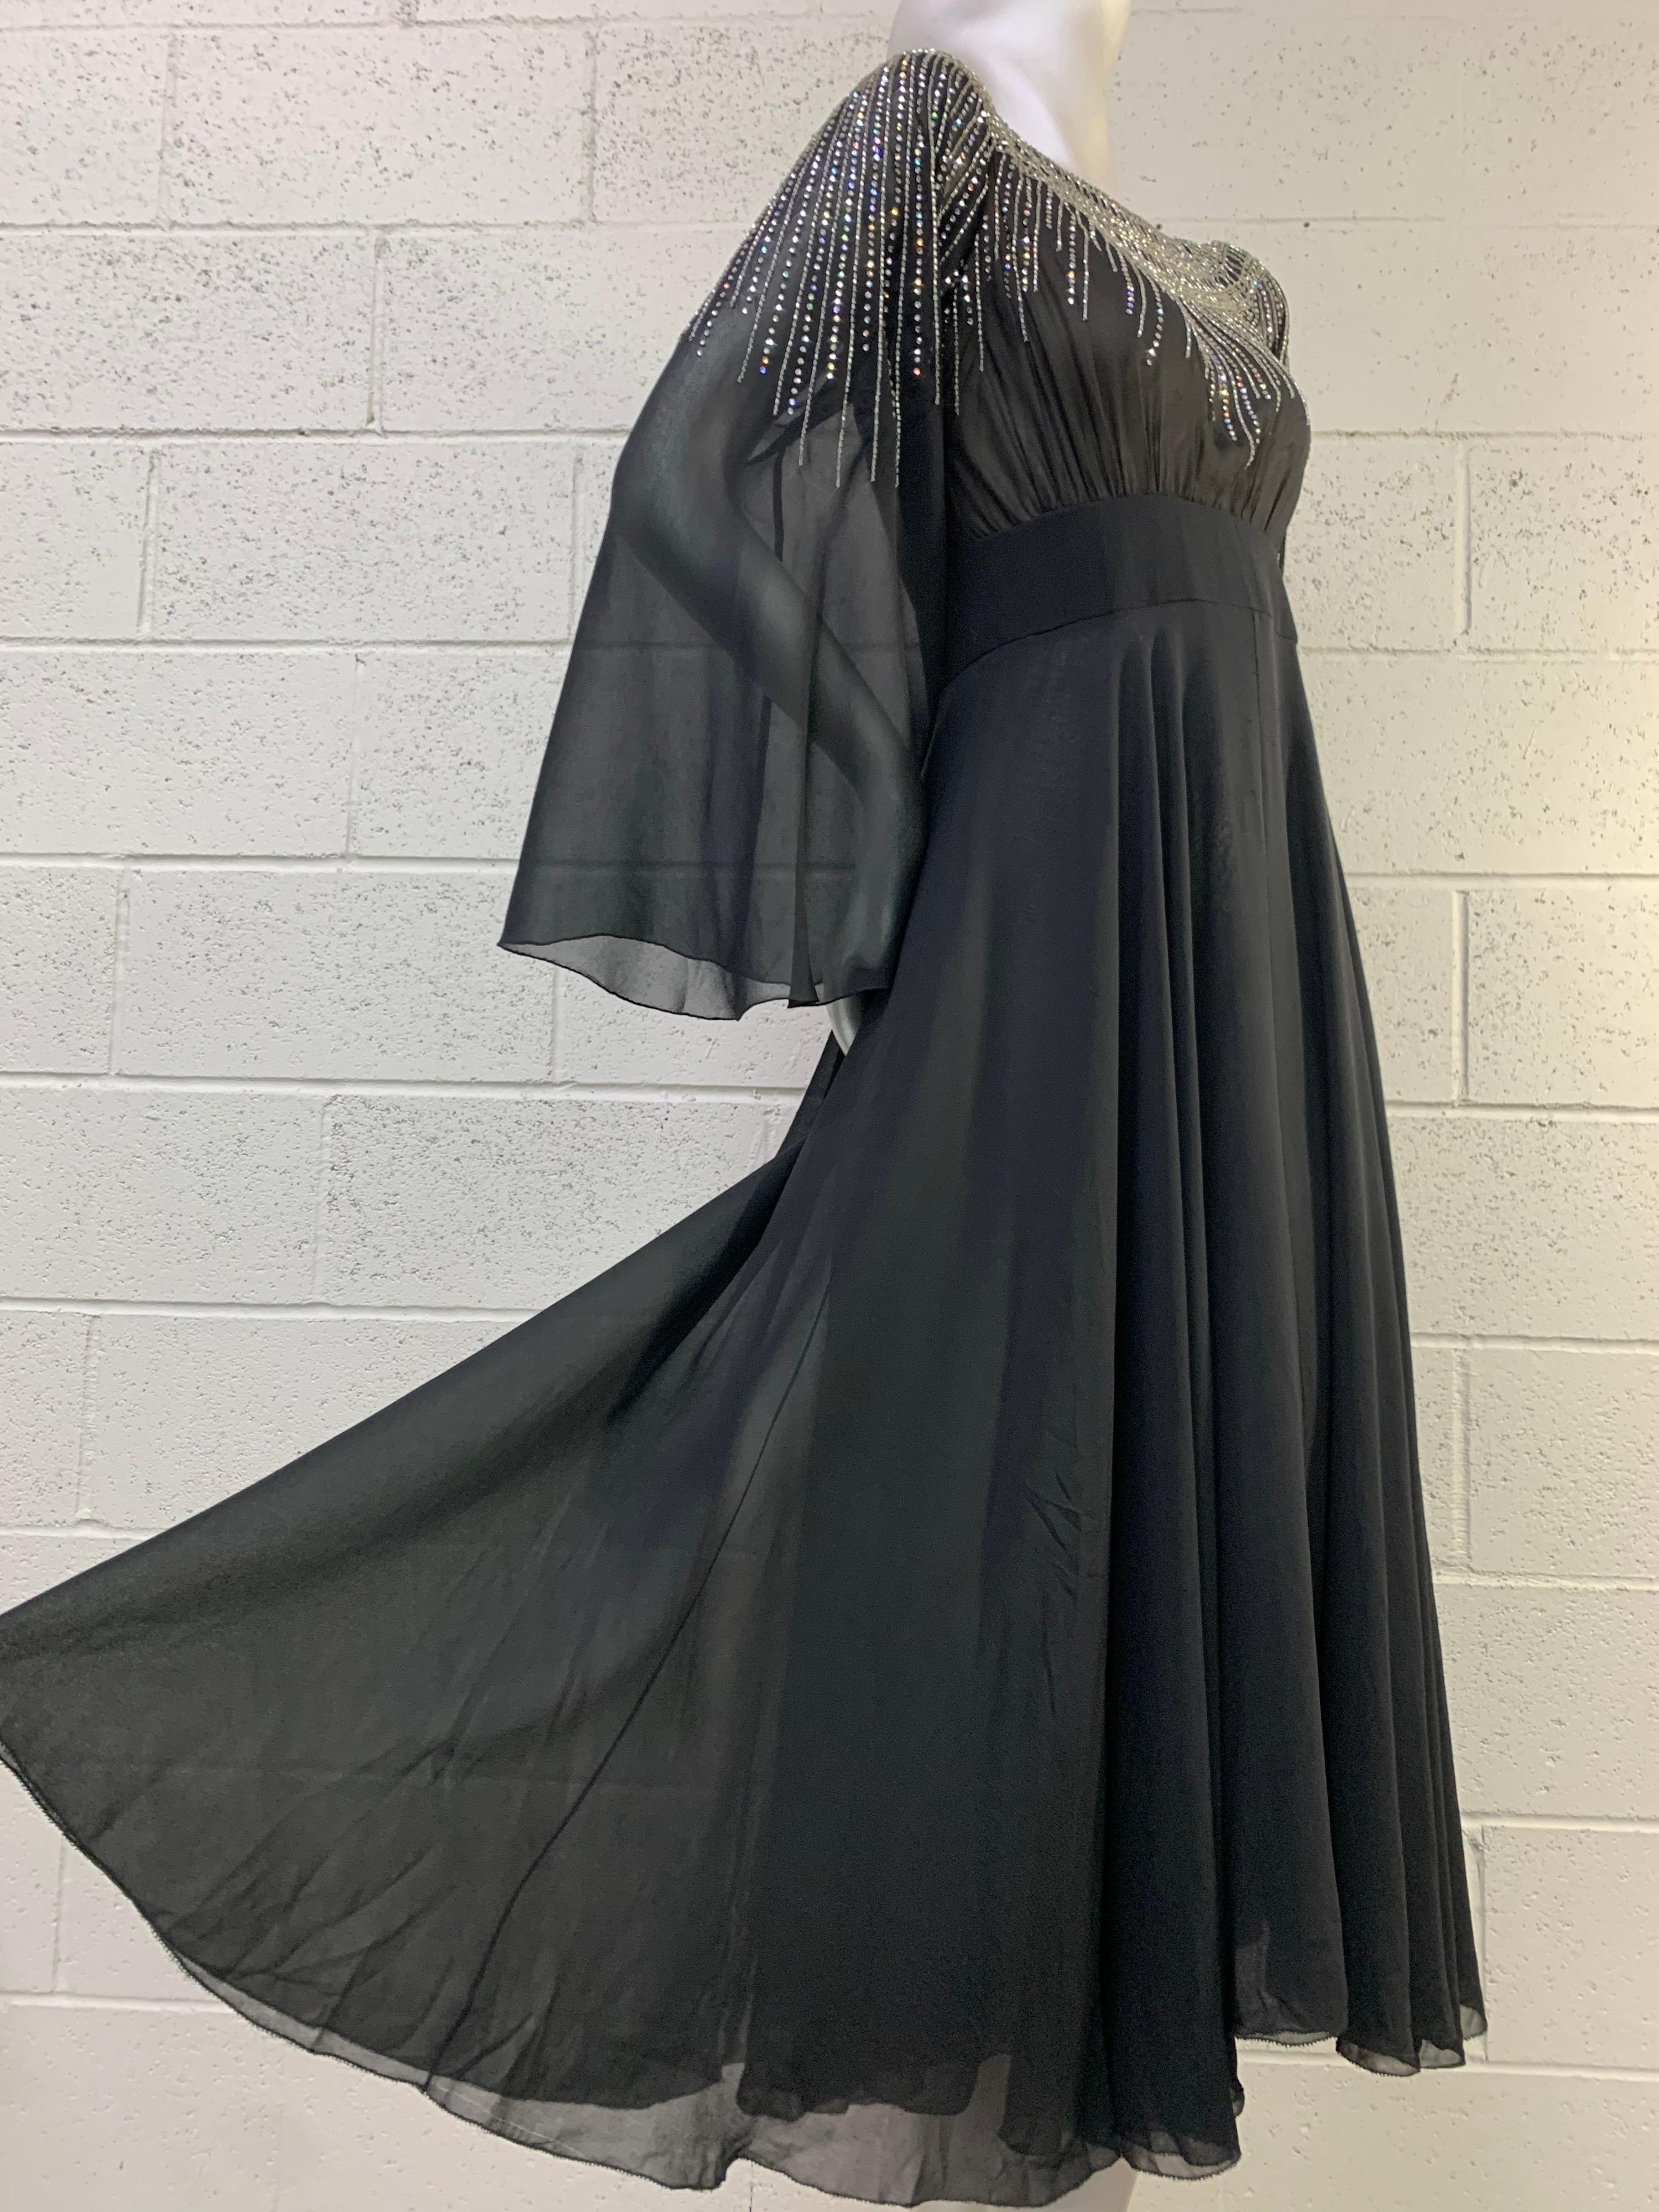 A lovely early 1970s Pauline Trigere black silk chiffon dancing dress--flowing and graceful in a 1930s-inspired design with dramatic beaded and rhinestone starburst design at neckline. Bell sleeves. Double layered chiffon and lined body. Banded